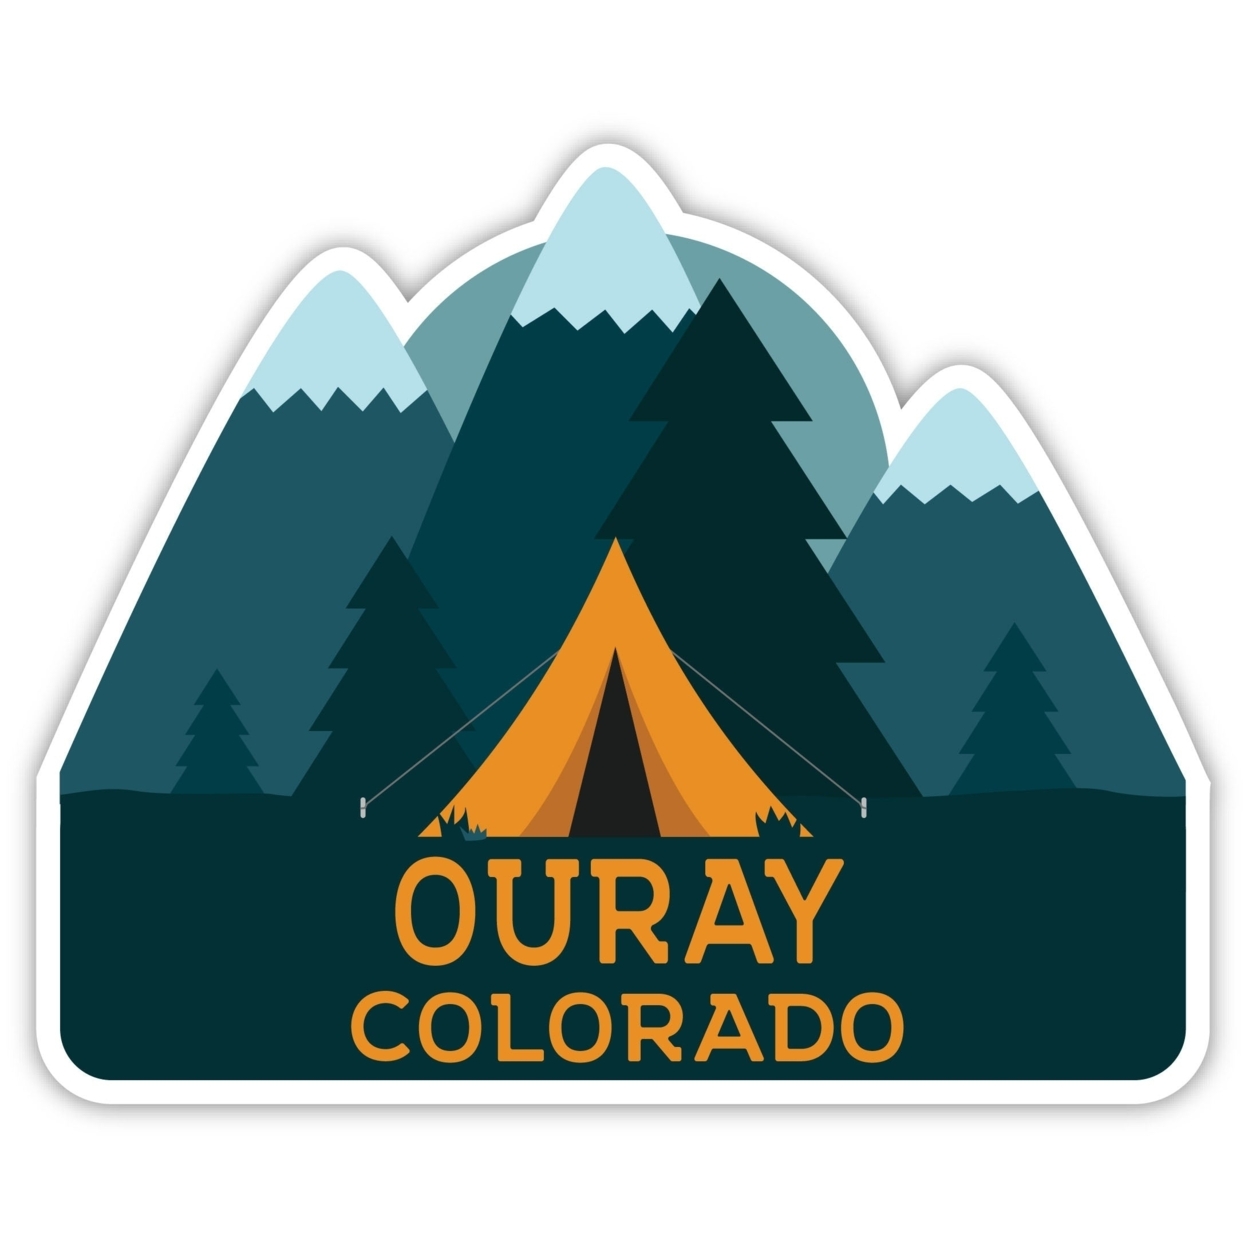 Ouray Colorado Souvenir Decorative Stickers (Choose Theme And Size) - Single Unit, 4-Inch, Camp Life